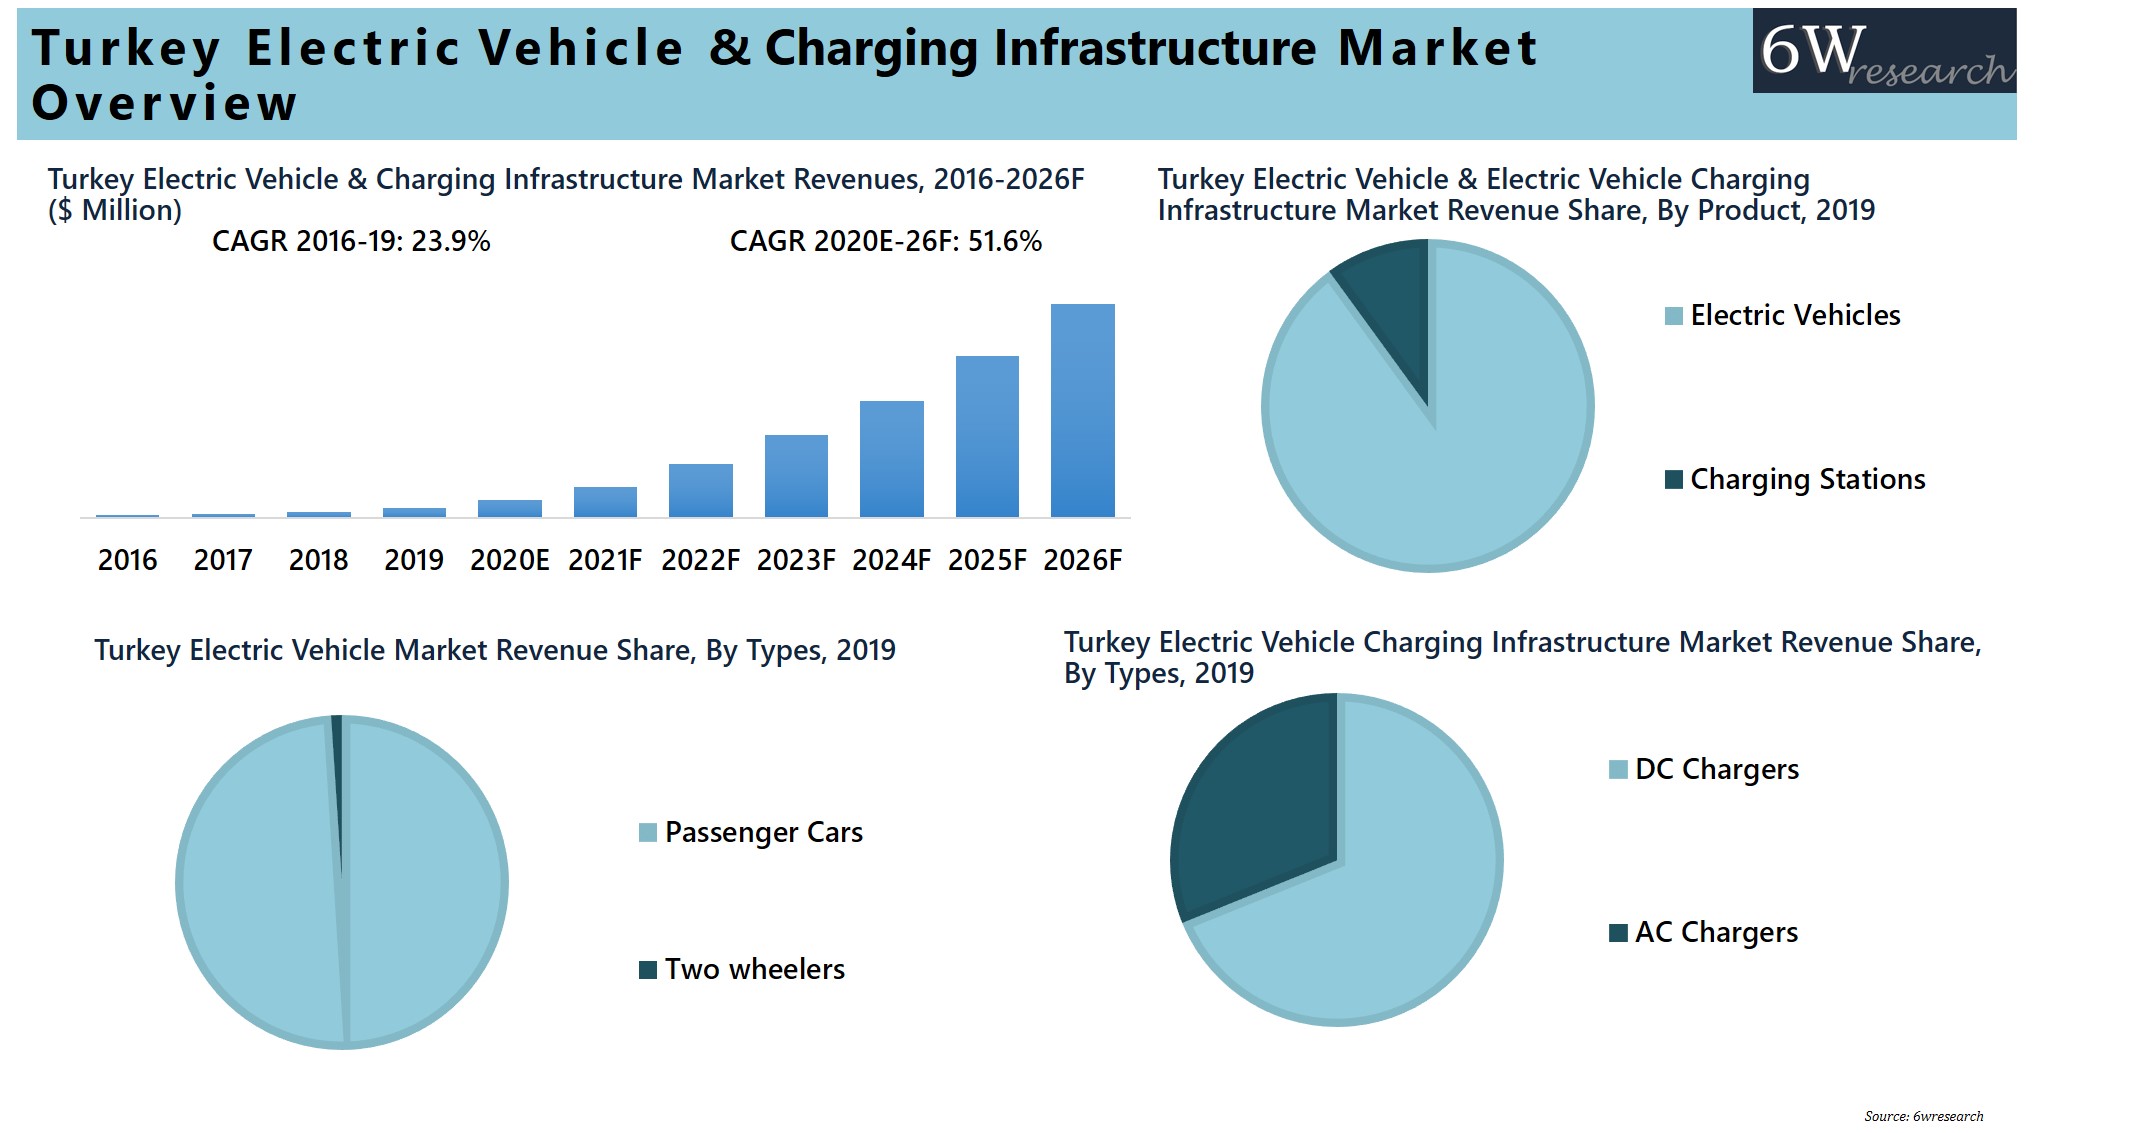 Turkey Electric Vehicle & Charging Infrastructure Market